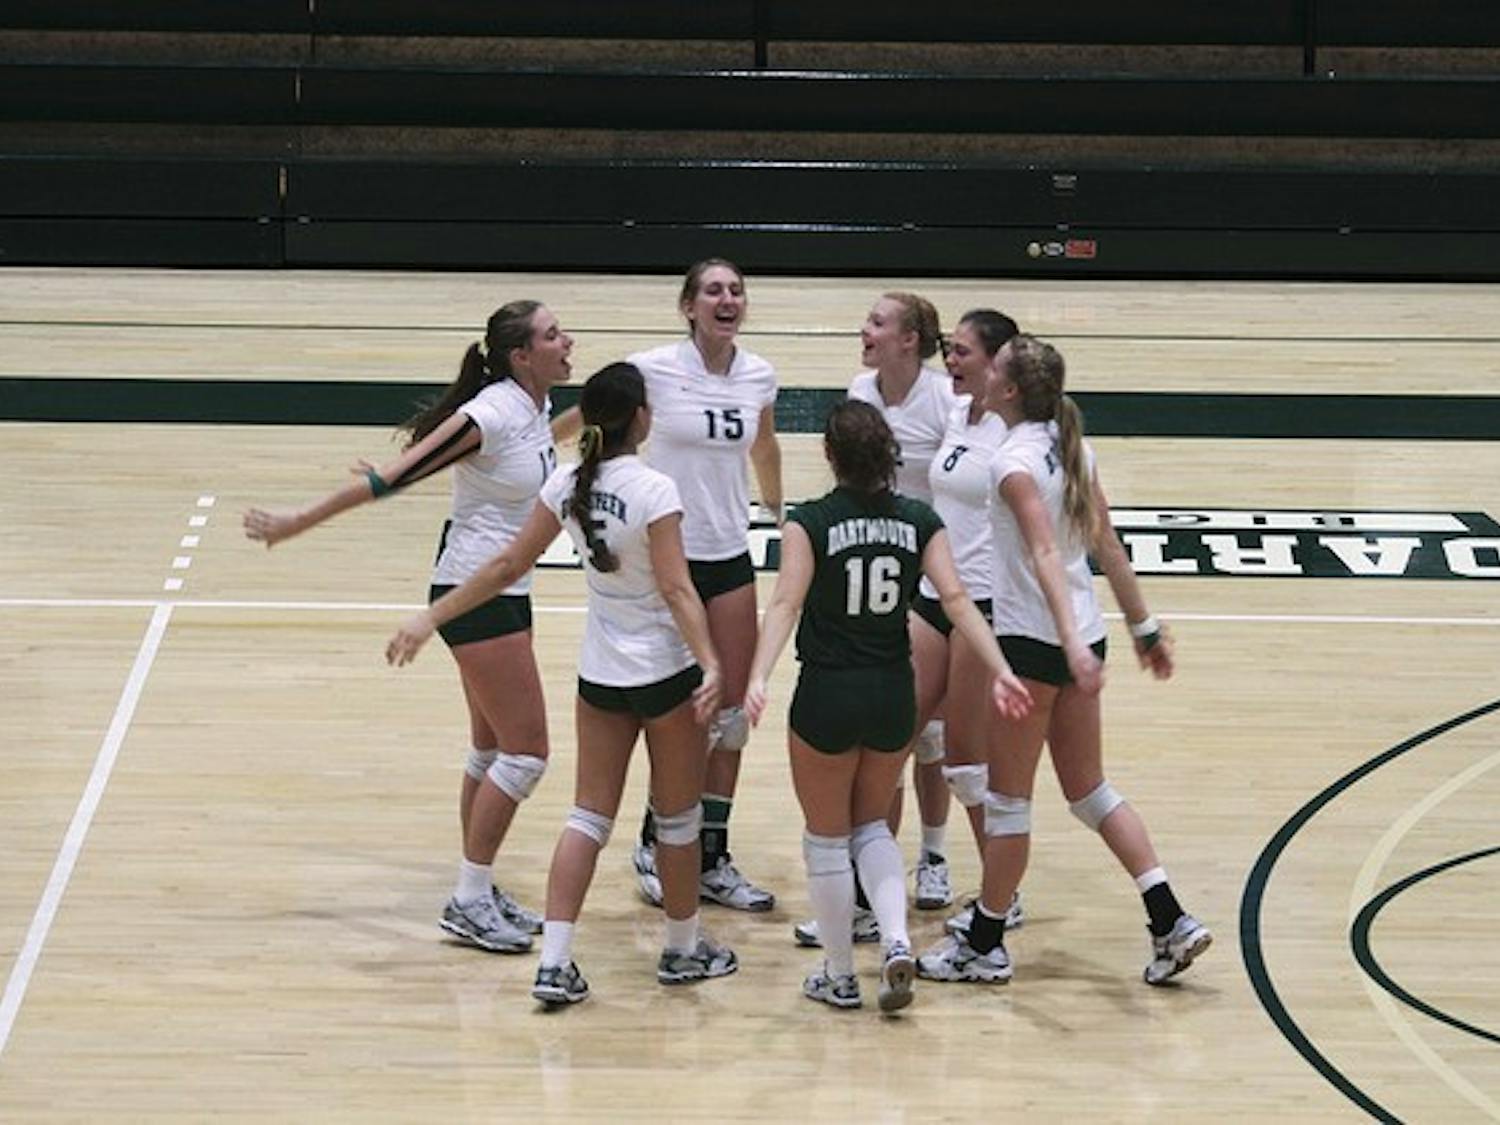 The Big Green volleyball team failed to convert several set points in the first game, leading to a straight-set loss to the University of New Hampshire.